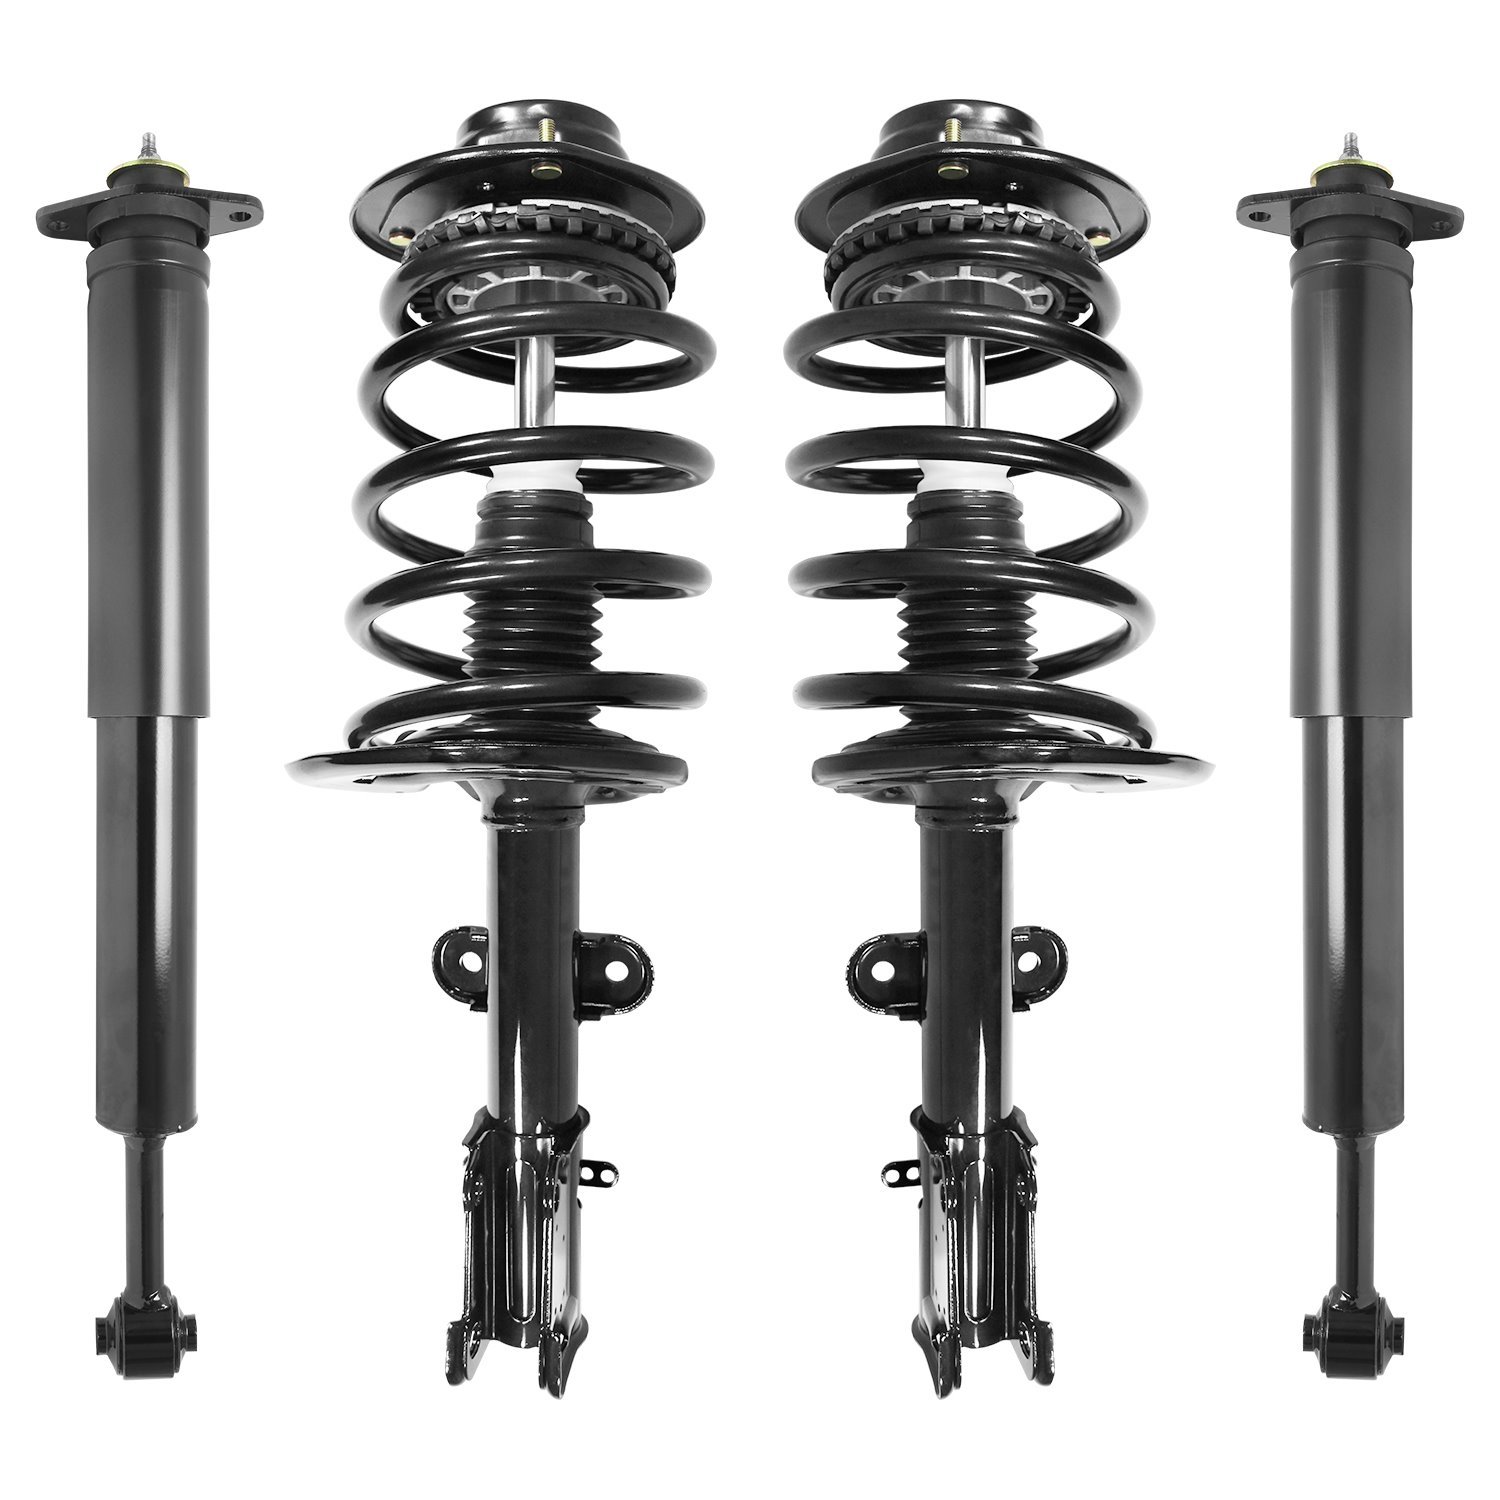 4-11173-253060-001 Front & Rear Suspension Strut & Coil Spring Assembly Fits Select Chrysler Pacifica